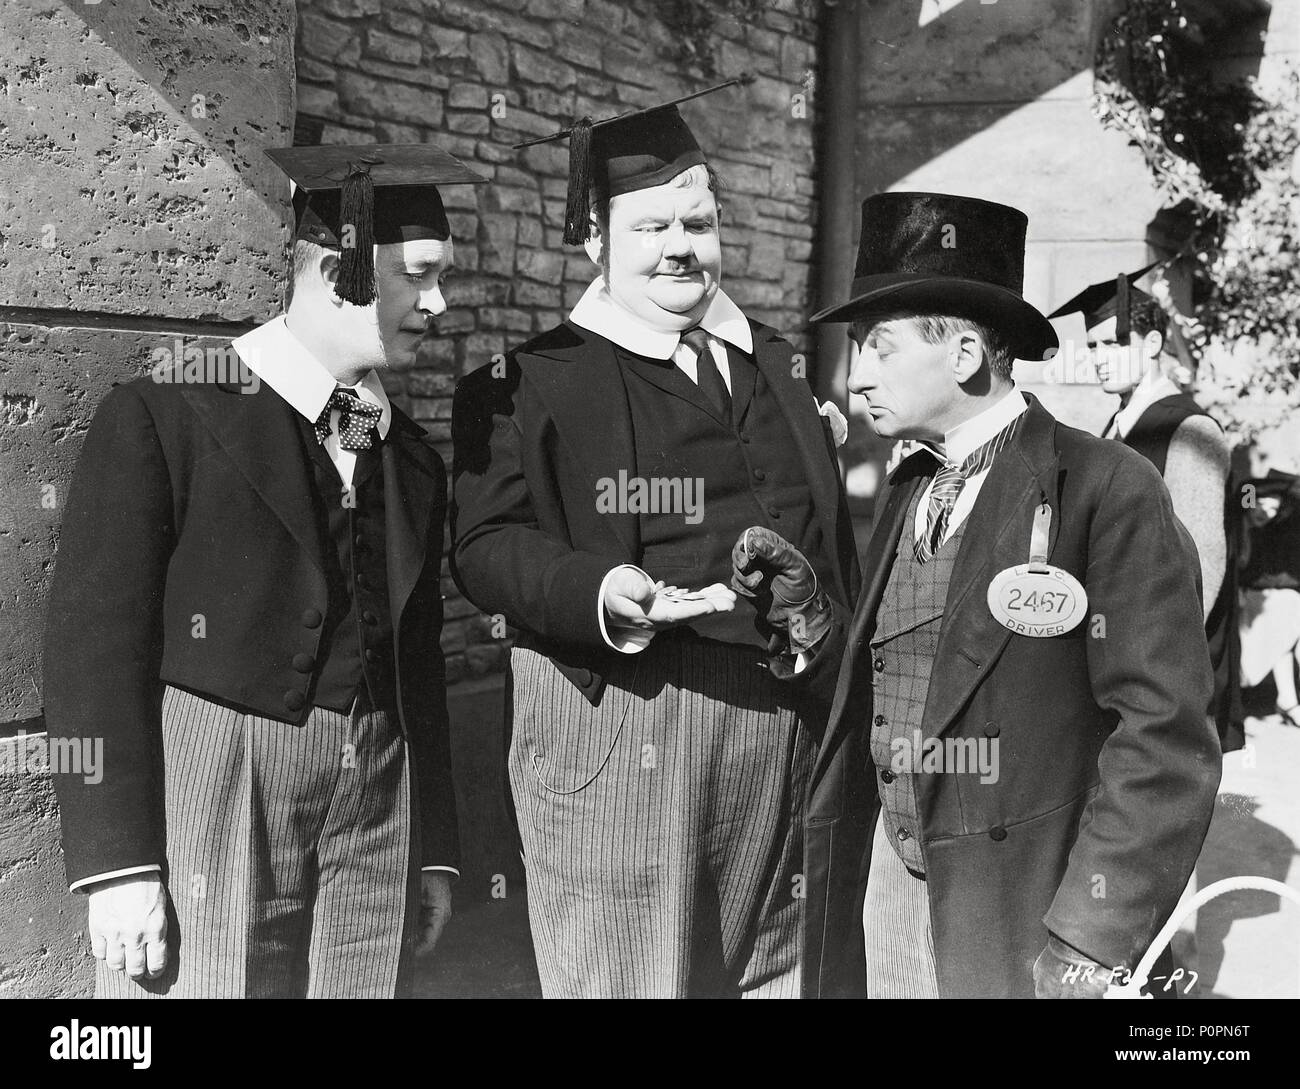 Original Film Title: A CHUMP AT OXFORD.  English Title: A CHUMP AT OXFORD.  Film Director: ALF GOULDING.  Year: 1940.  Stars: OLIVER HARDY; STAN LAUREL. Credit: HAL ROACH/UNITED ARTISTS / Album Stock Photo